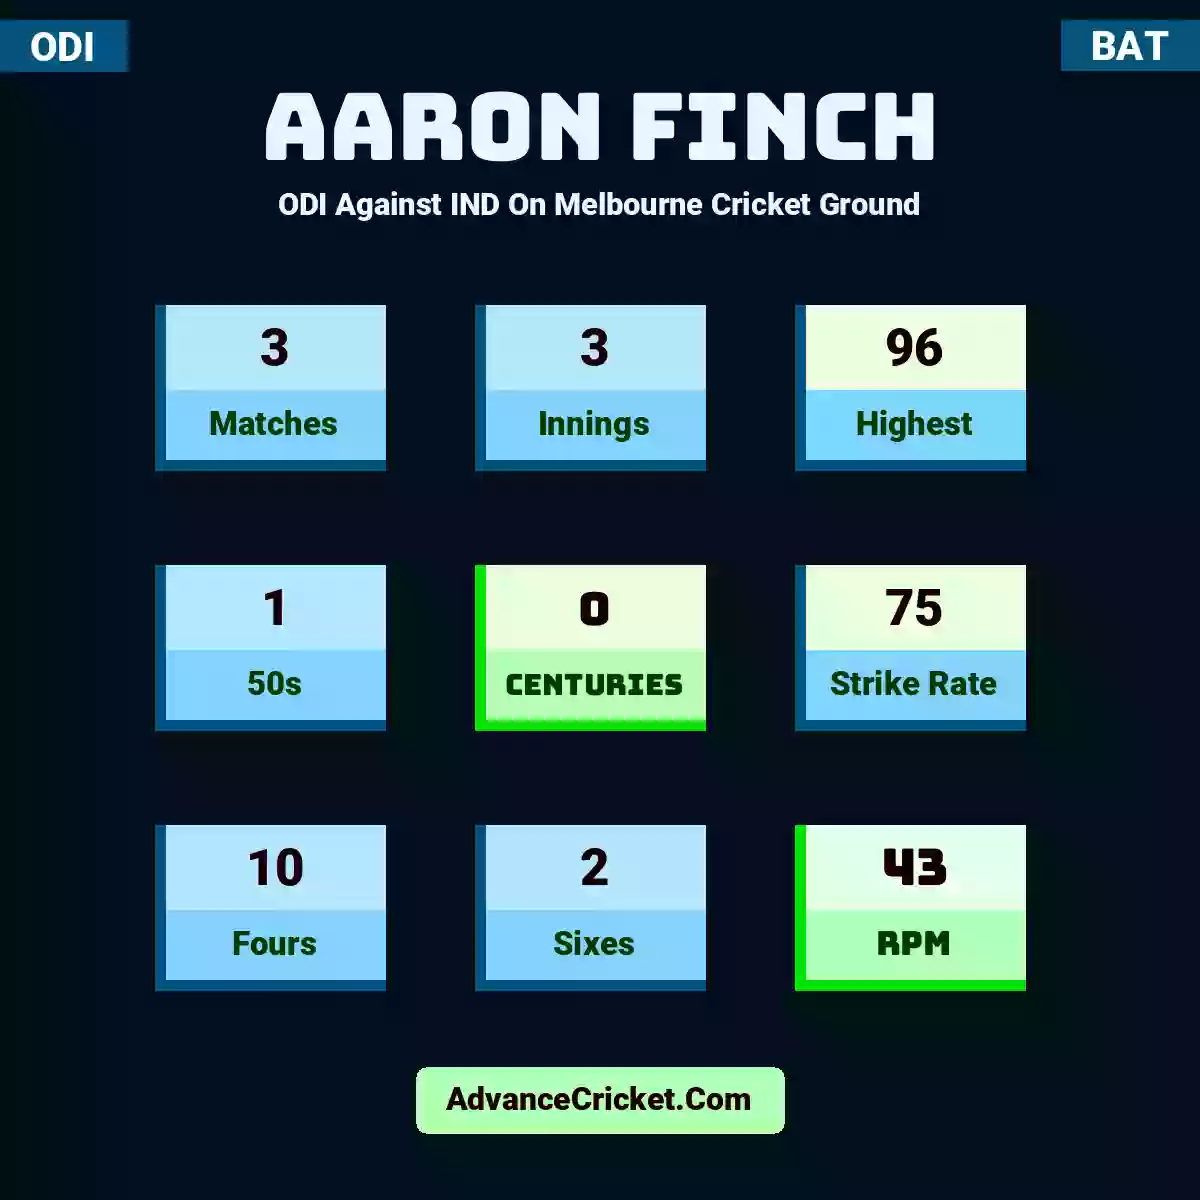 Aaron Finch ODI  Against IND On Melbourne Cricket Ground, Aaron Finch played 3 matches, scored 96 runs as highest, 1 half-centuries, and 0 centuries, with a strike rate of 75. A.Finch hit 10 fours and 2 sixes, with an RPM of 43.